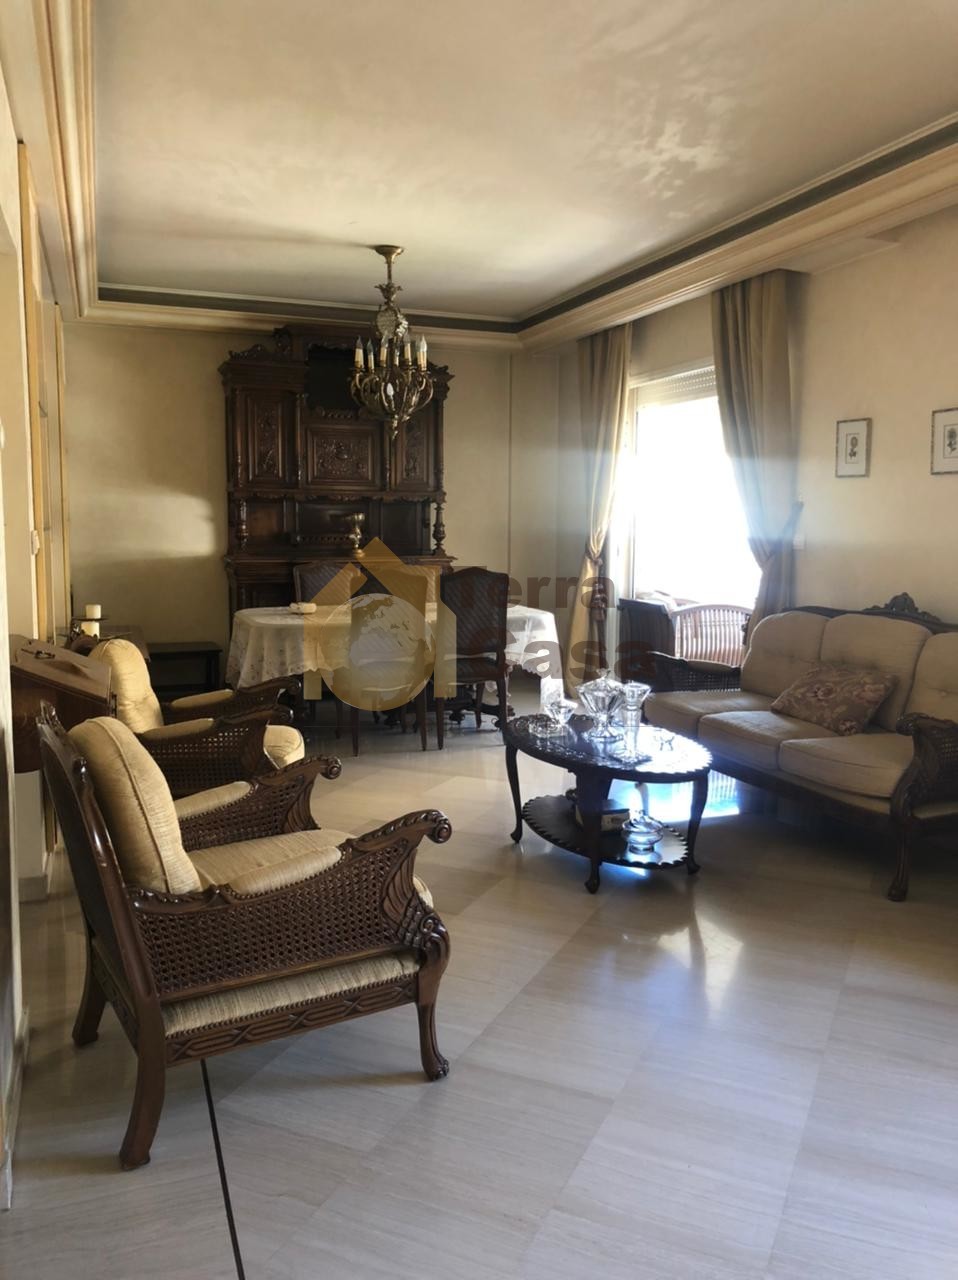 Fully furnished apartment cash payment. Ref# 2609